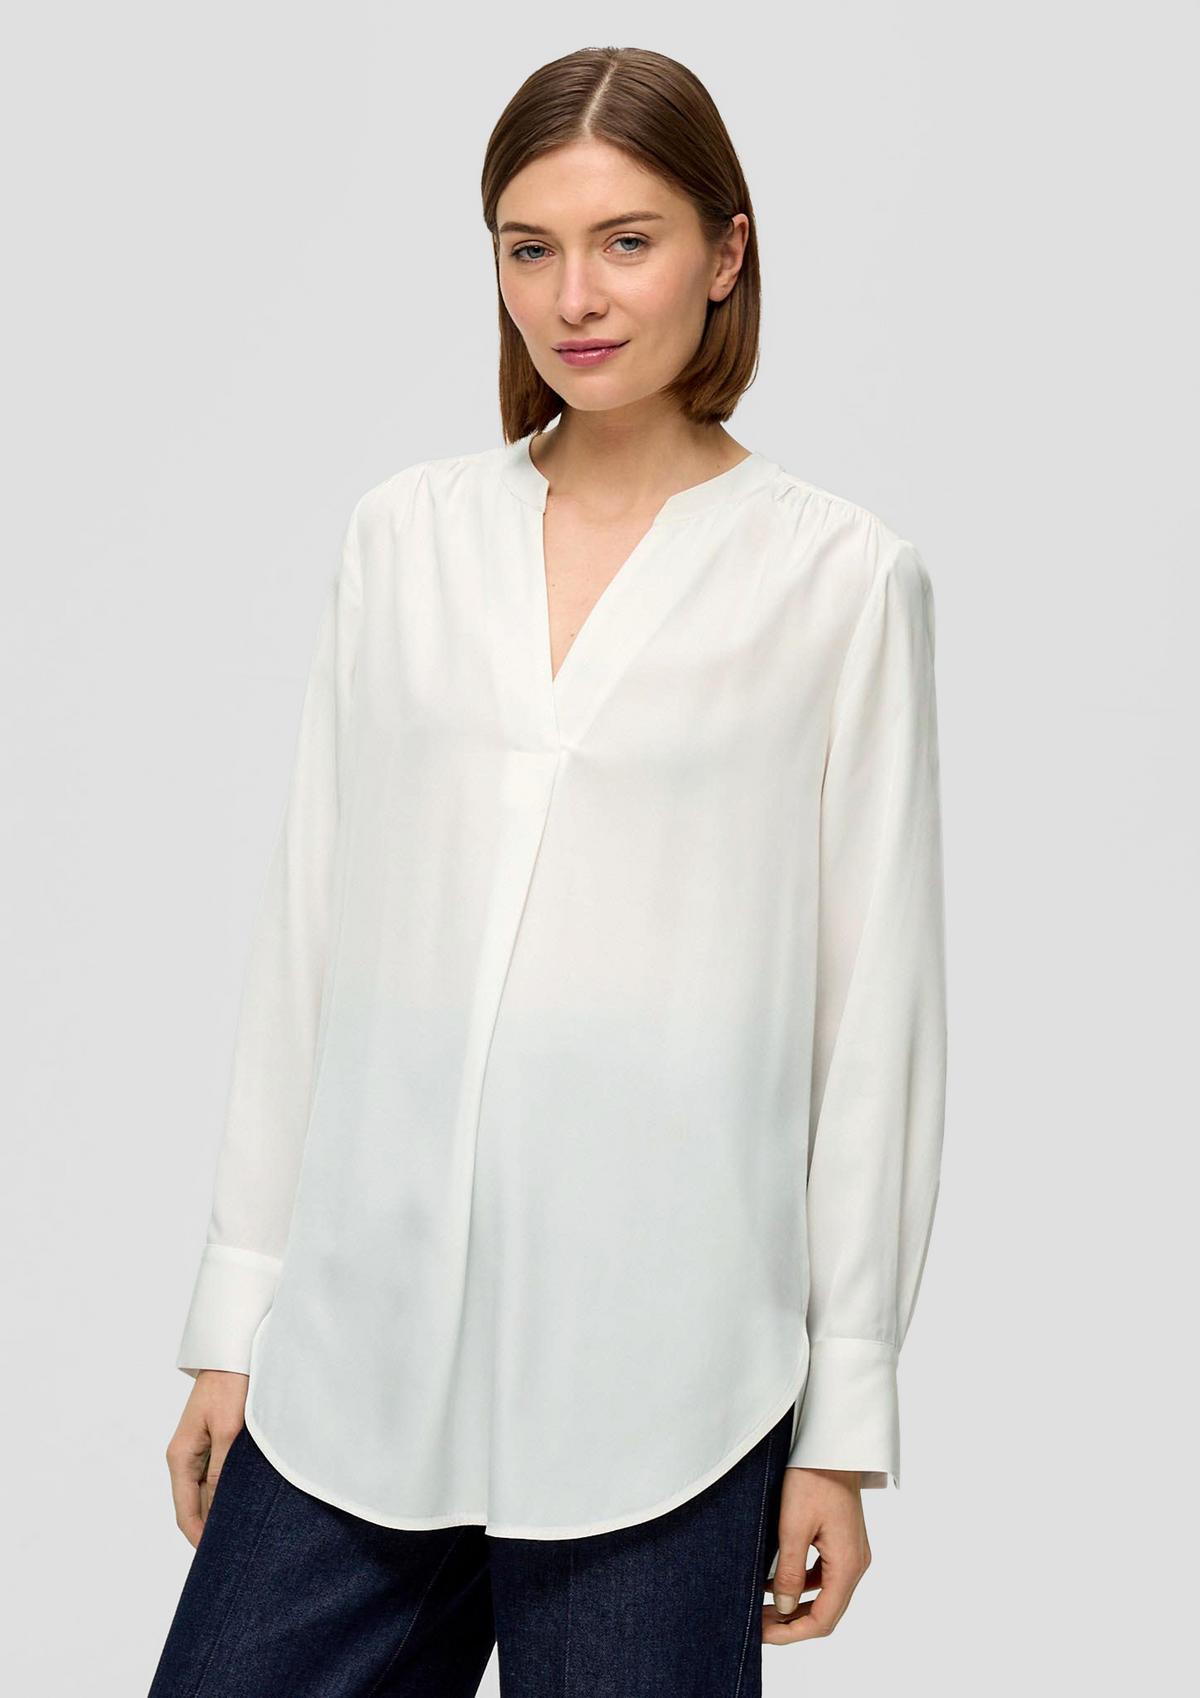 s.Oliver Blouse made of flowing woven fabric